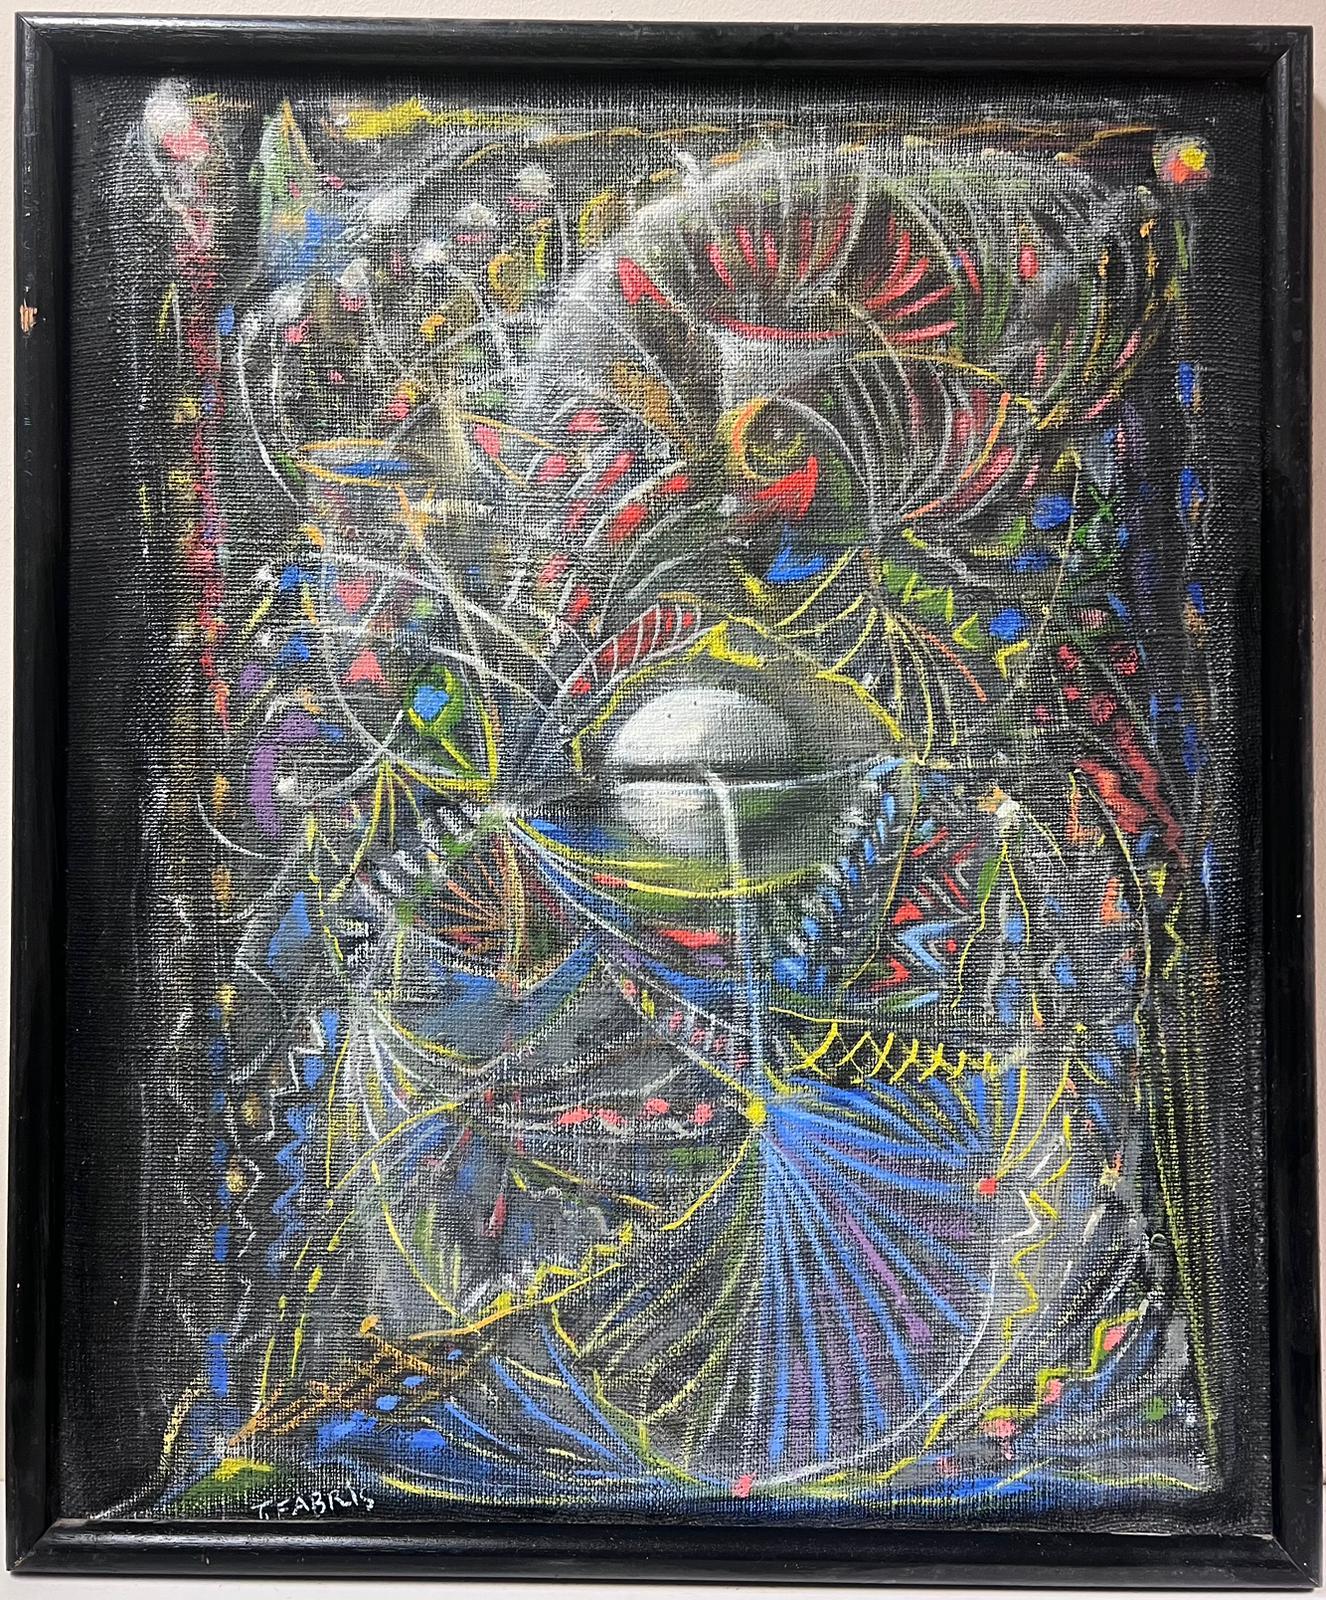 Tristan Fabris 1970's French Surrealist artist
Abstract Surrealist Figurative study
signed oil on canvas, framed
framed: 26.5 x 22.5 inches 
canvas: 25.5 x 21.5 inches
inscribed verso
private collection, France
The painting is in overall good and